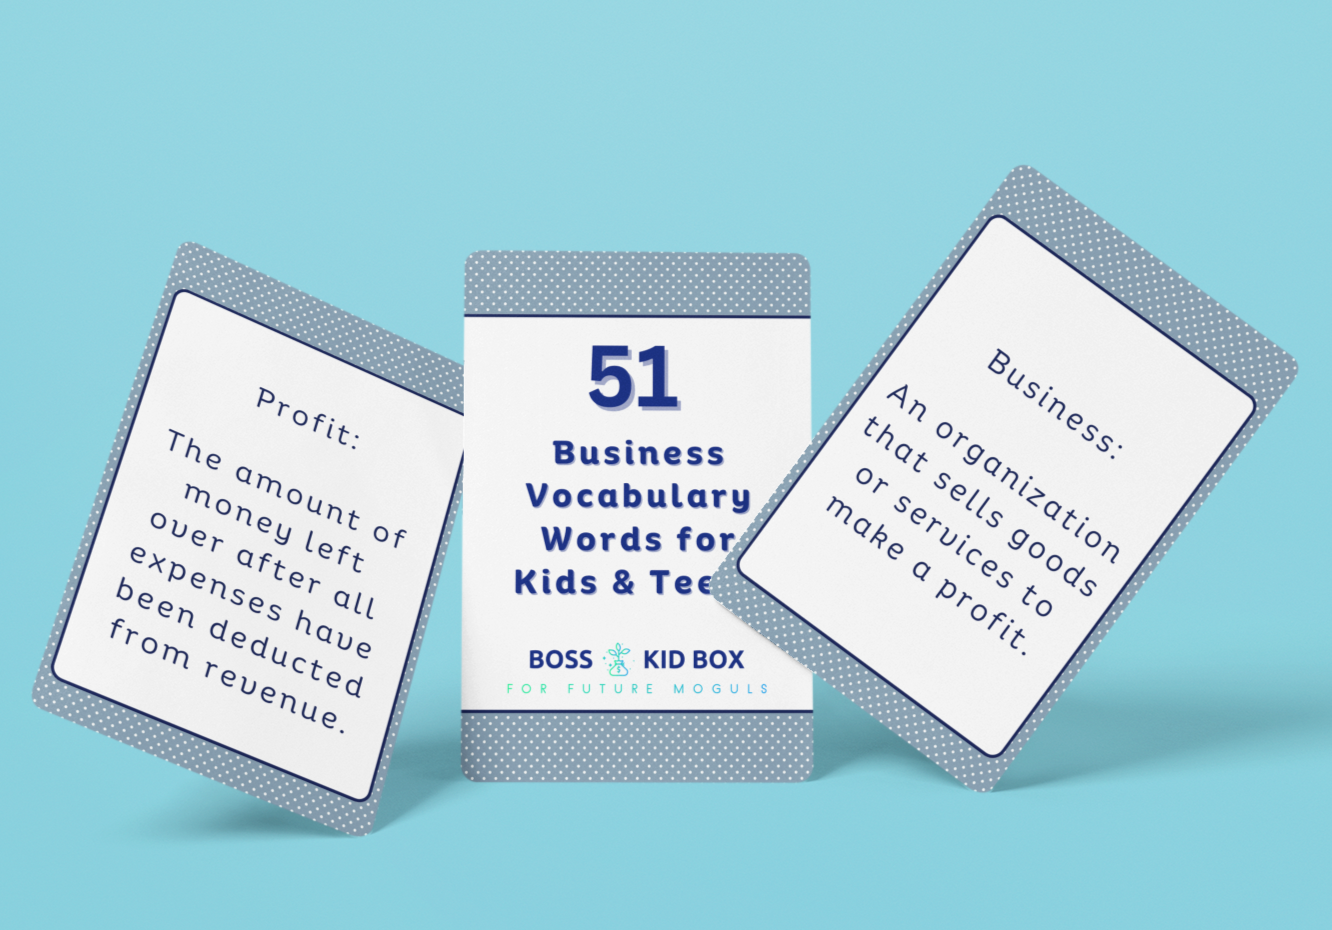 51 Business Vocabulary Words for Kids/Teens